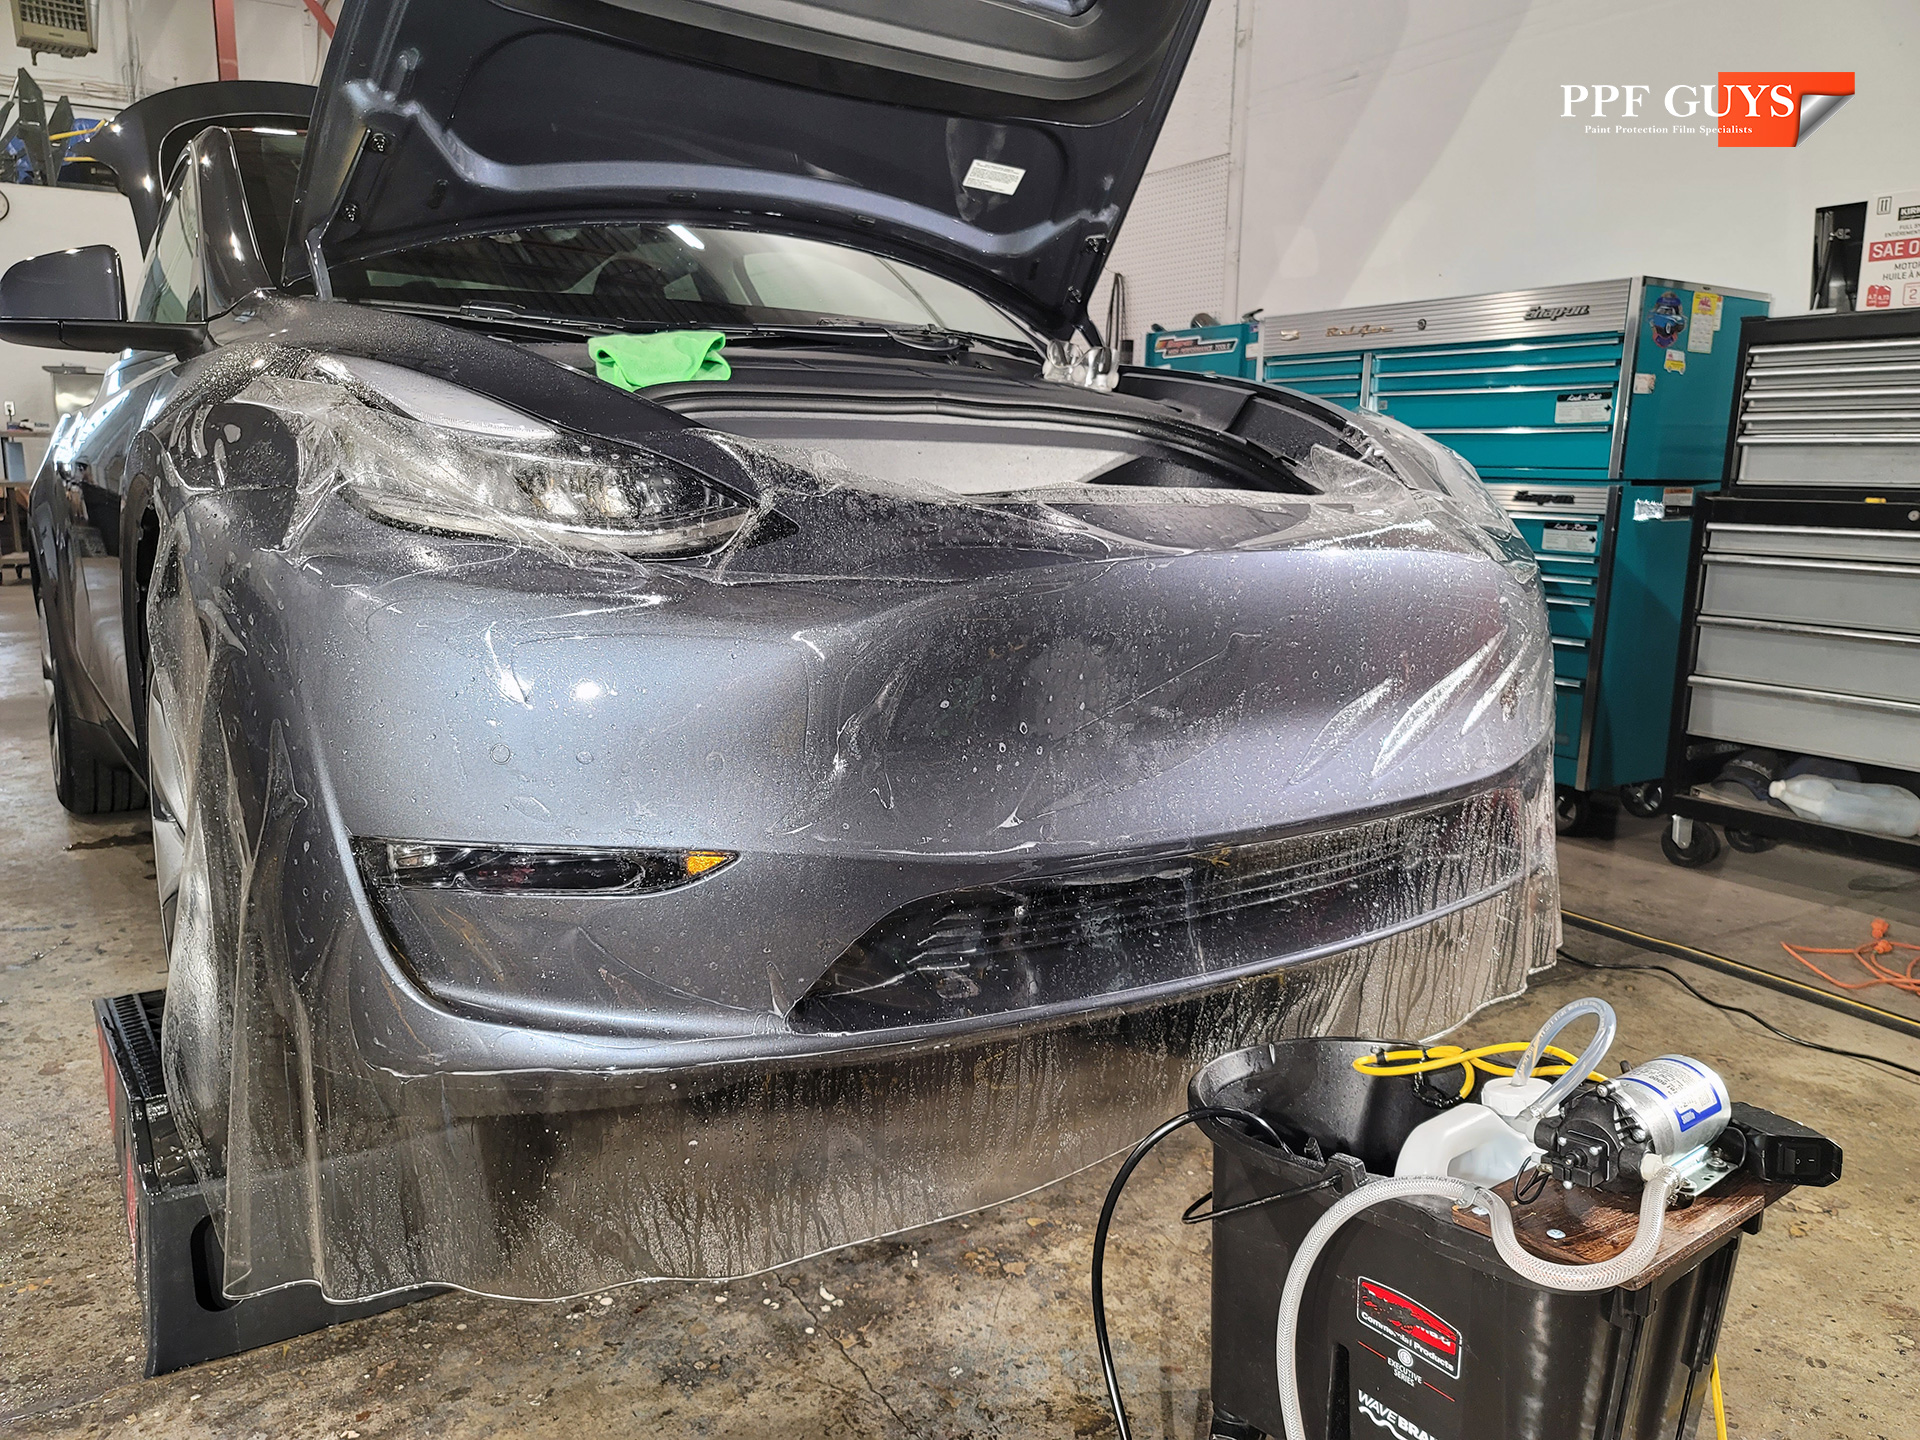 Paint Protection Film (PPF) - Xpel 